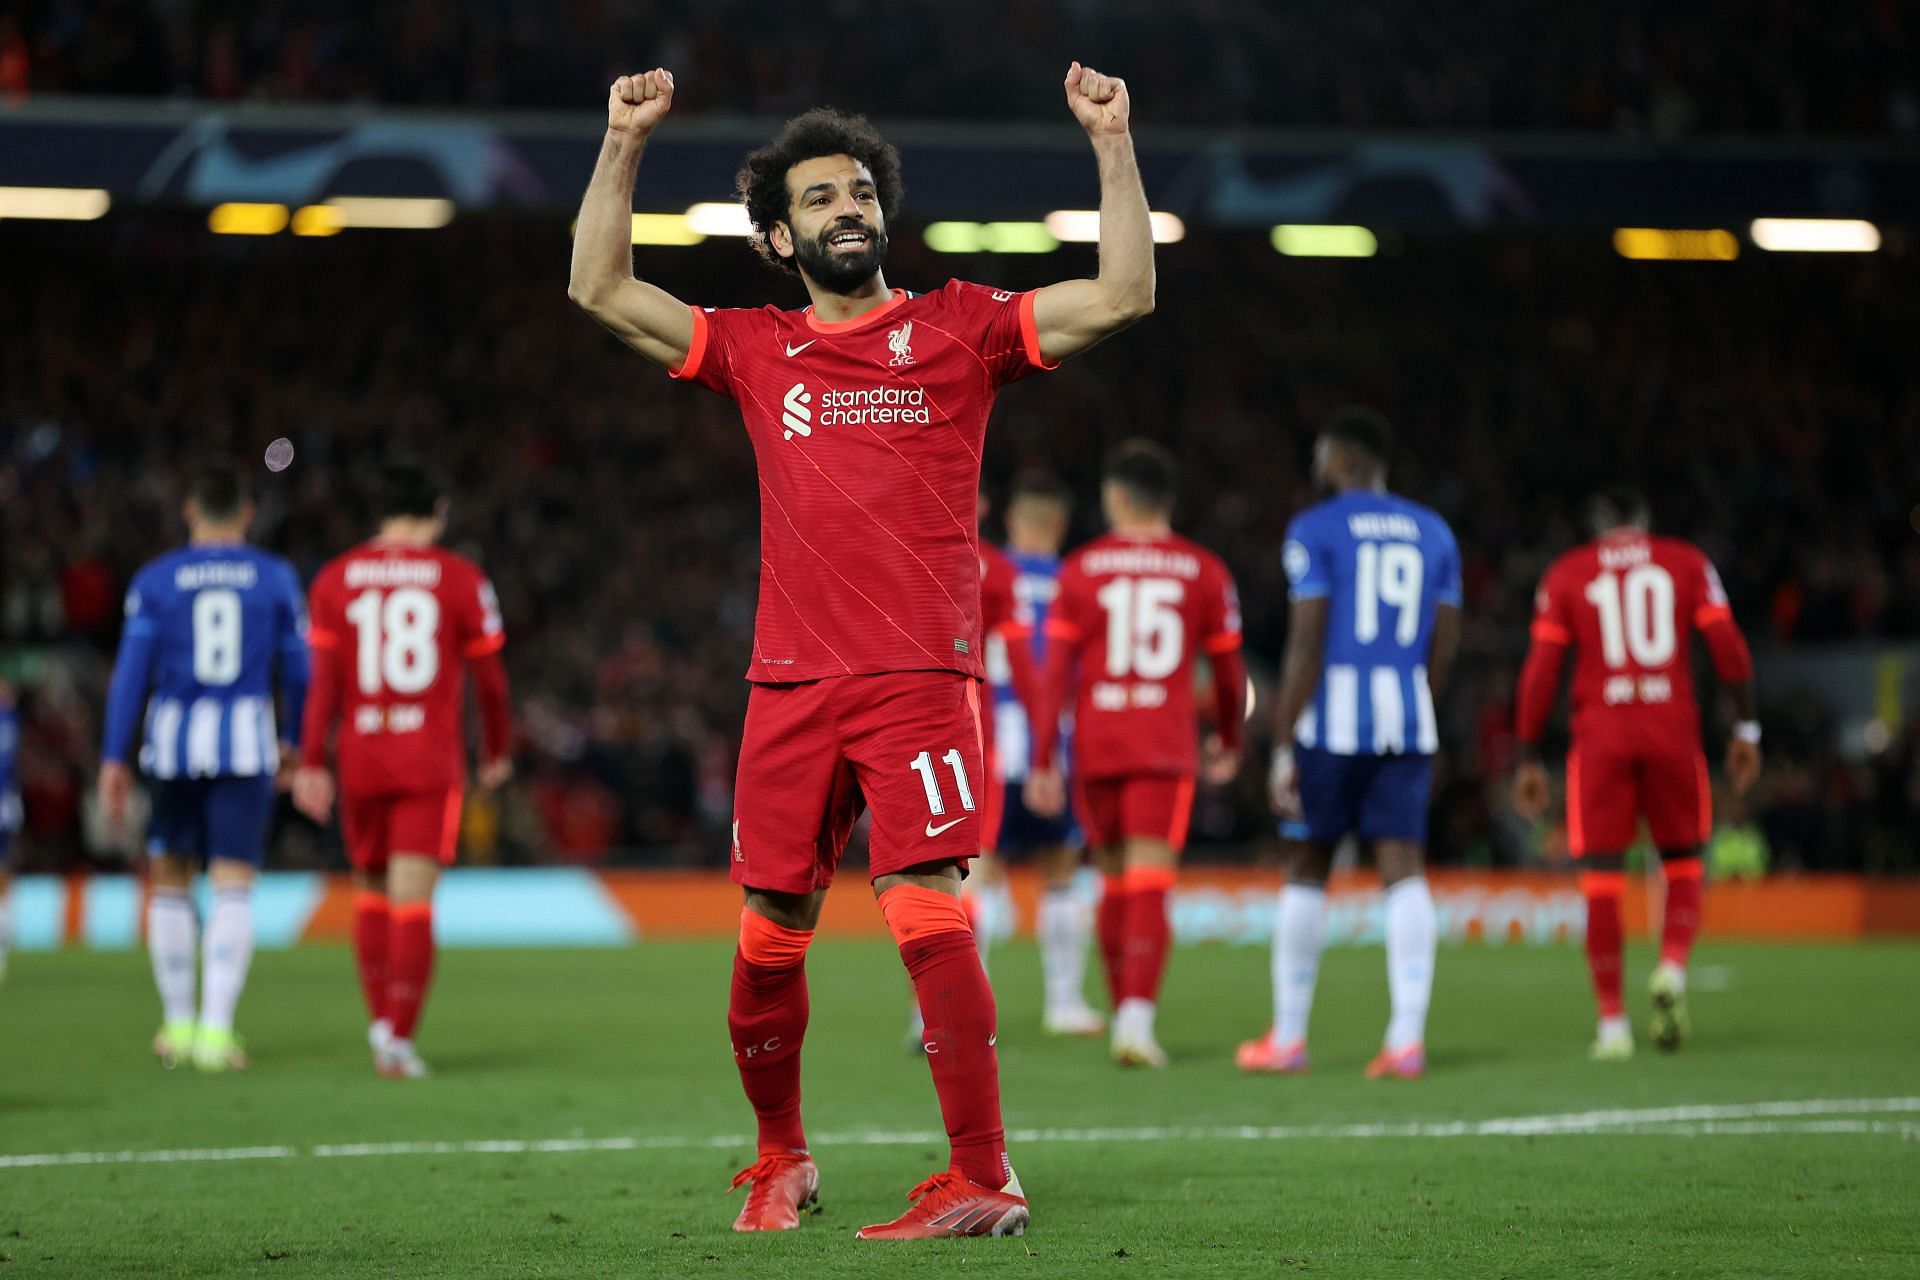 Mohamed Salah has been other-worldly for Liverpool this season.